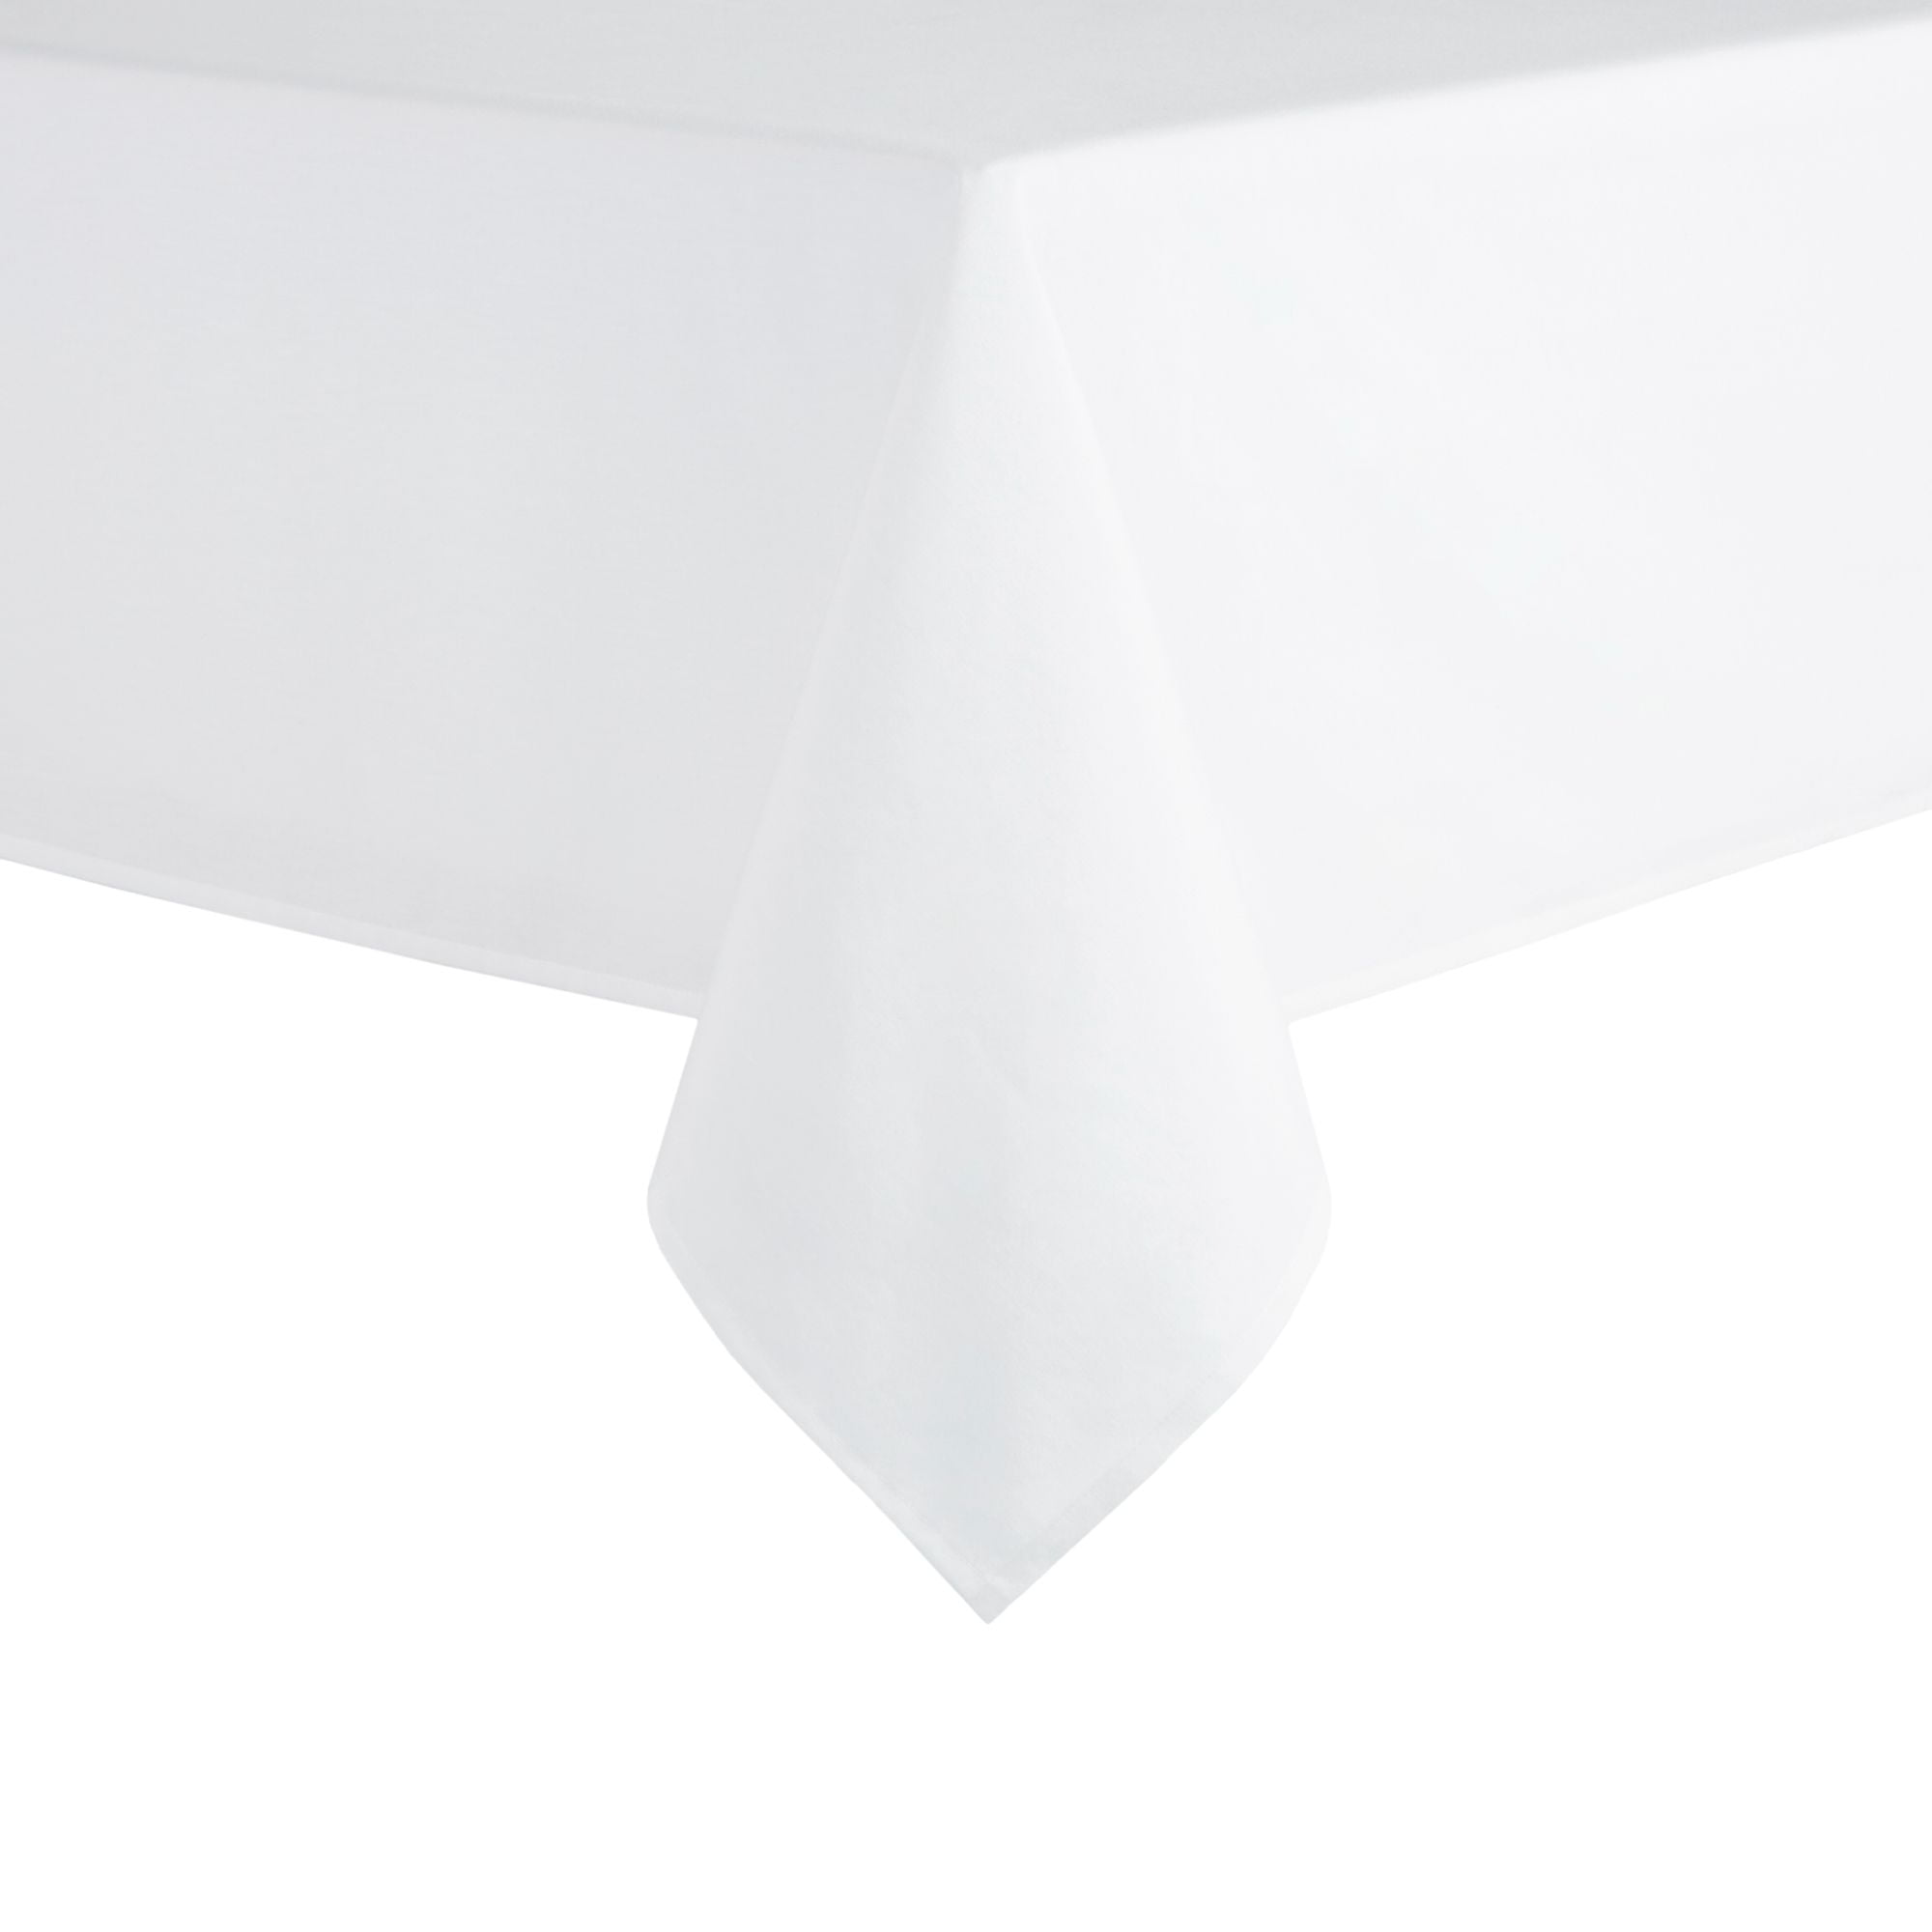 Mainstays Yale Tablecloth, White, 60"W x 102"L Rectangle, Available in various sizes and colors